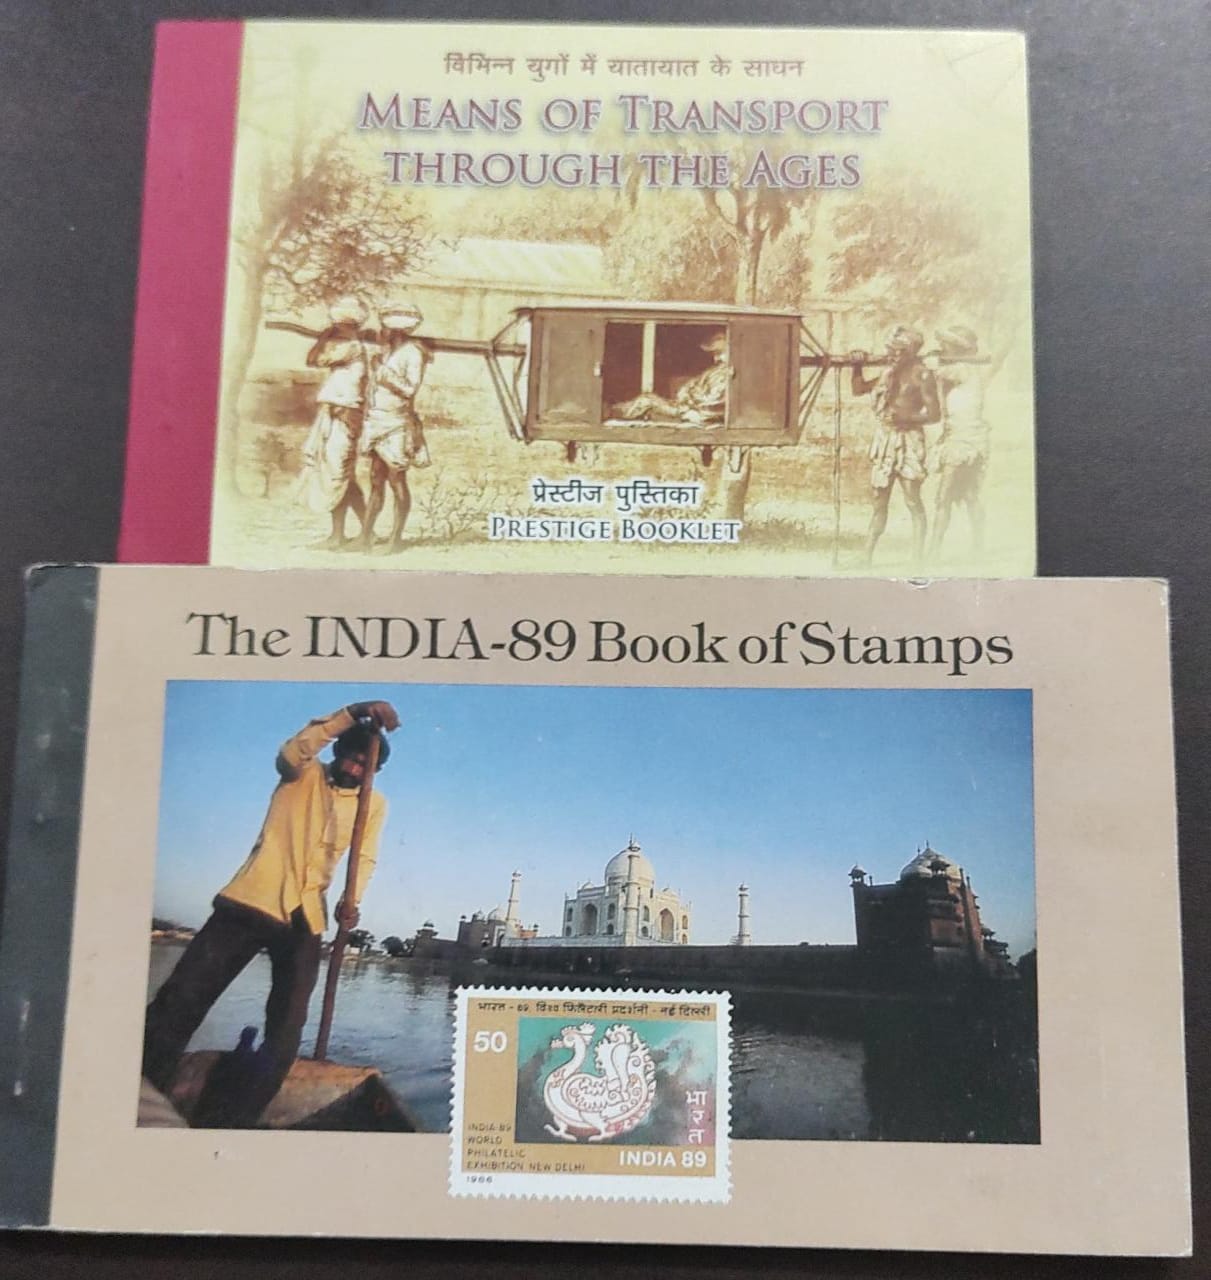 India post issued booklets-India 1989+ Transport booklet.